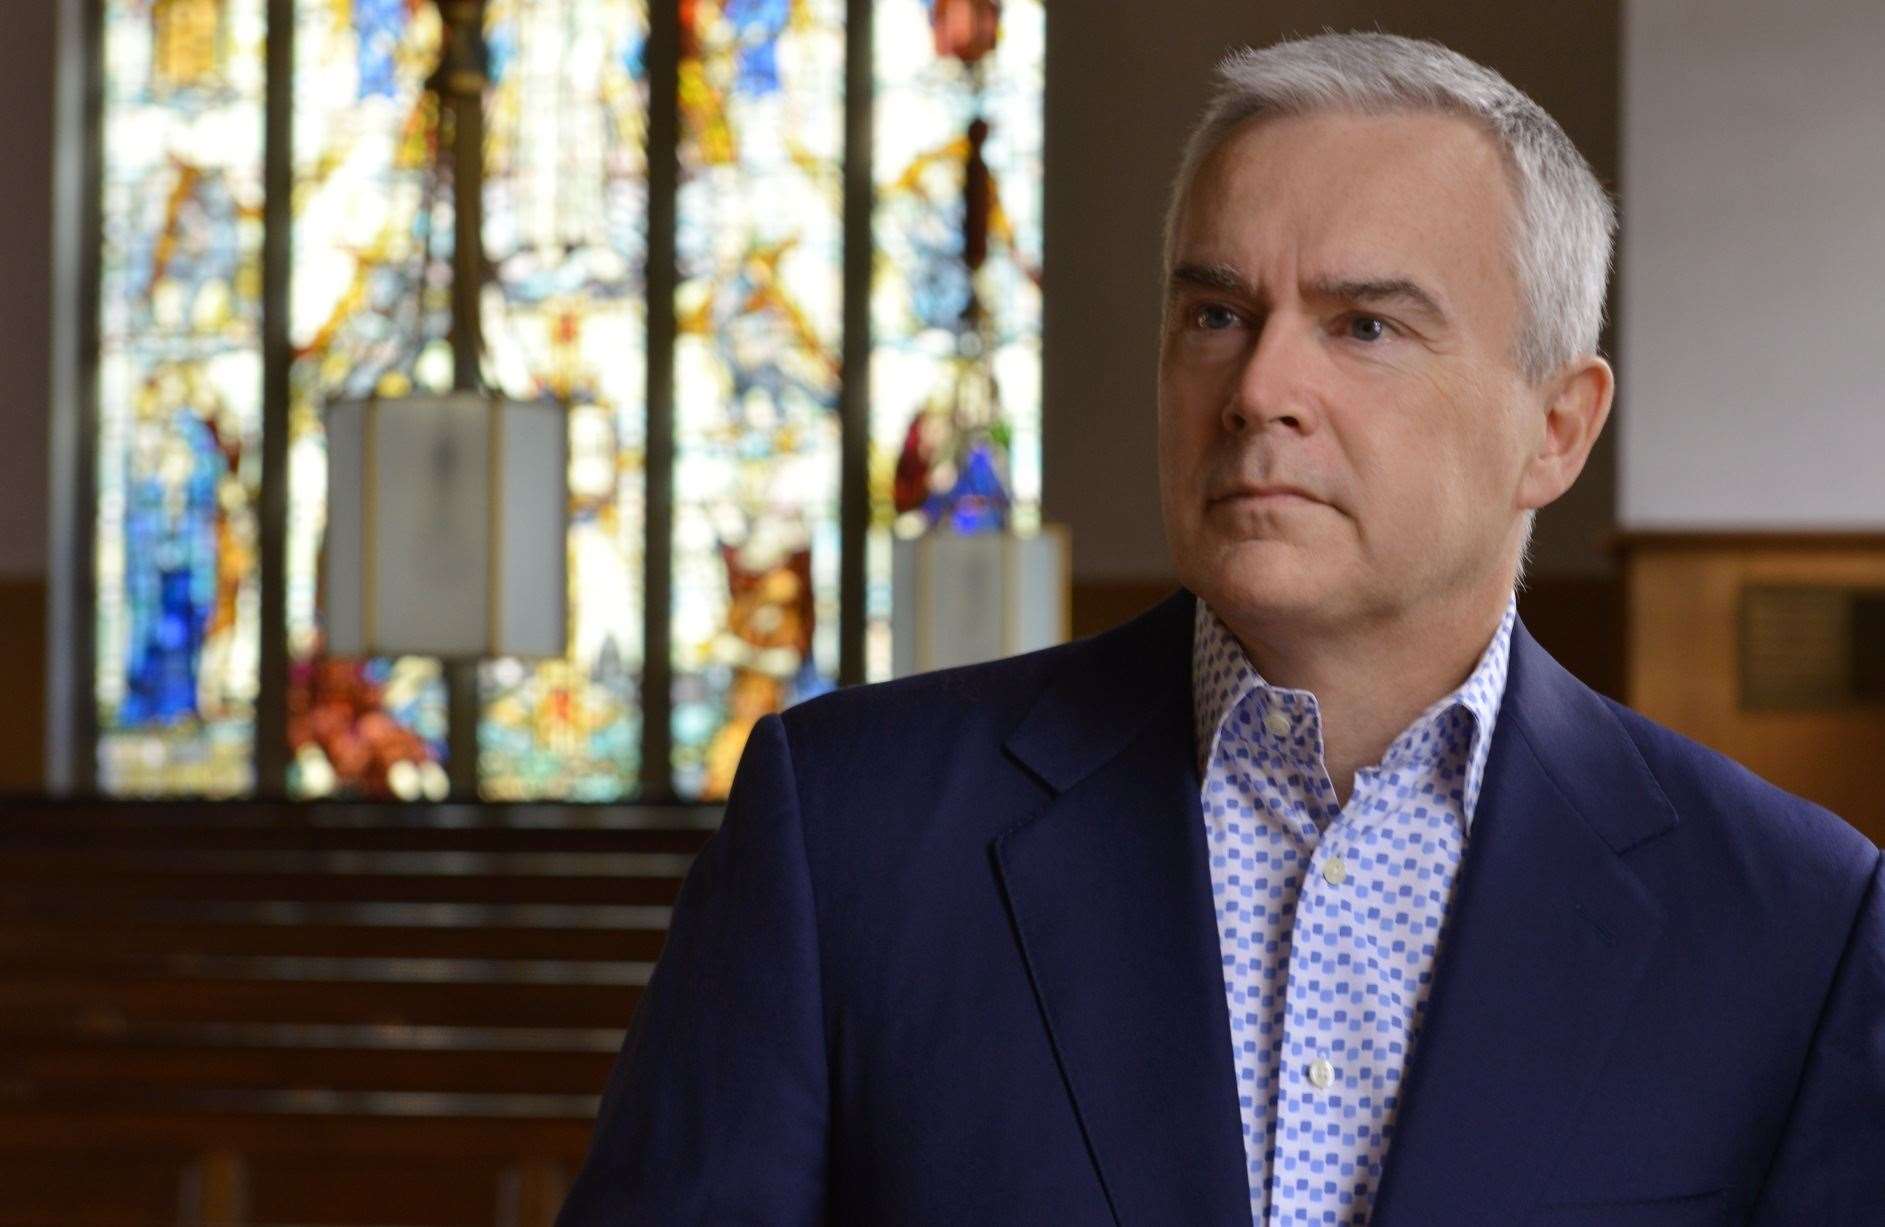 Broadcaster and journalist Huw Edwards, is the Vice President of The National Churches Trust